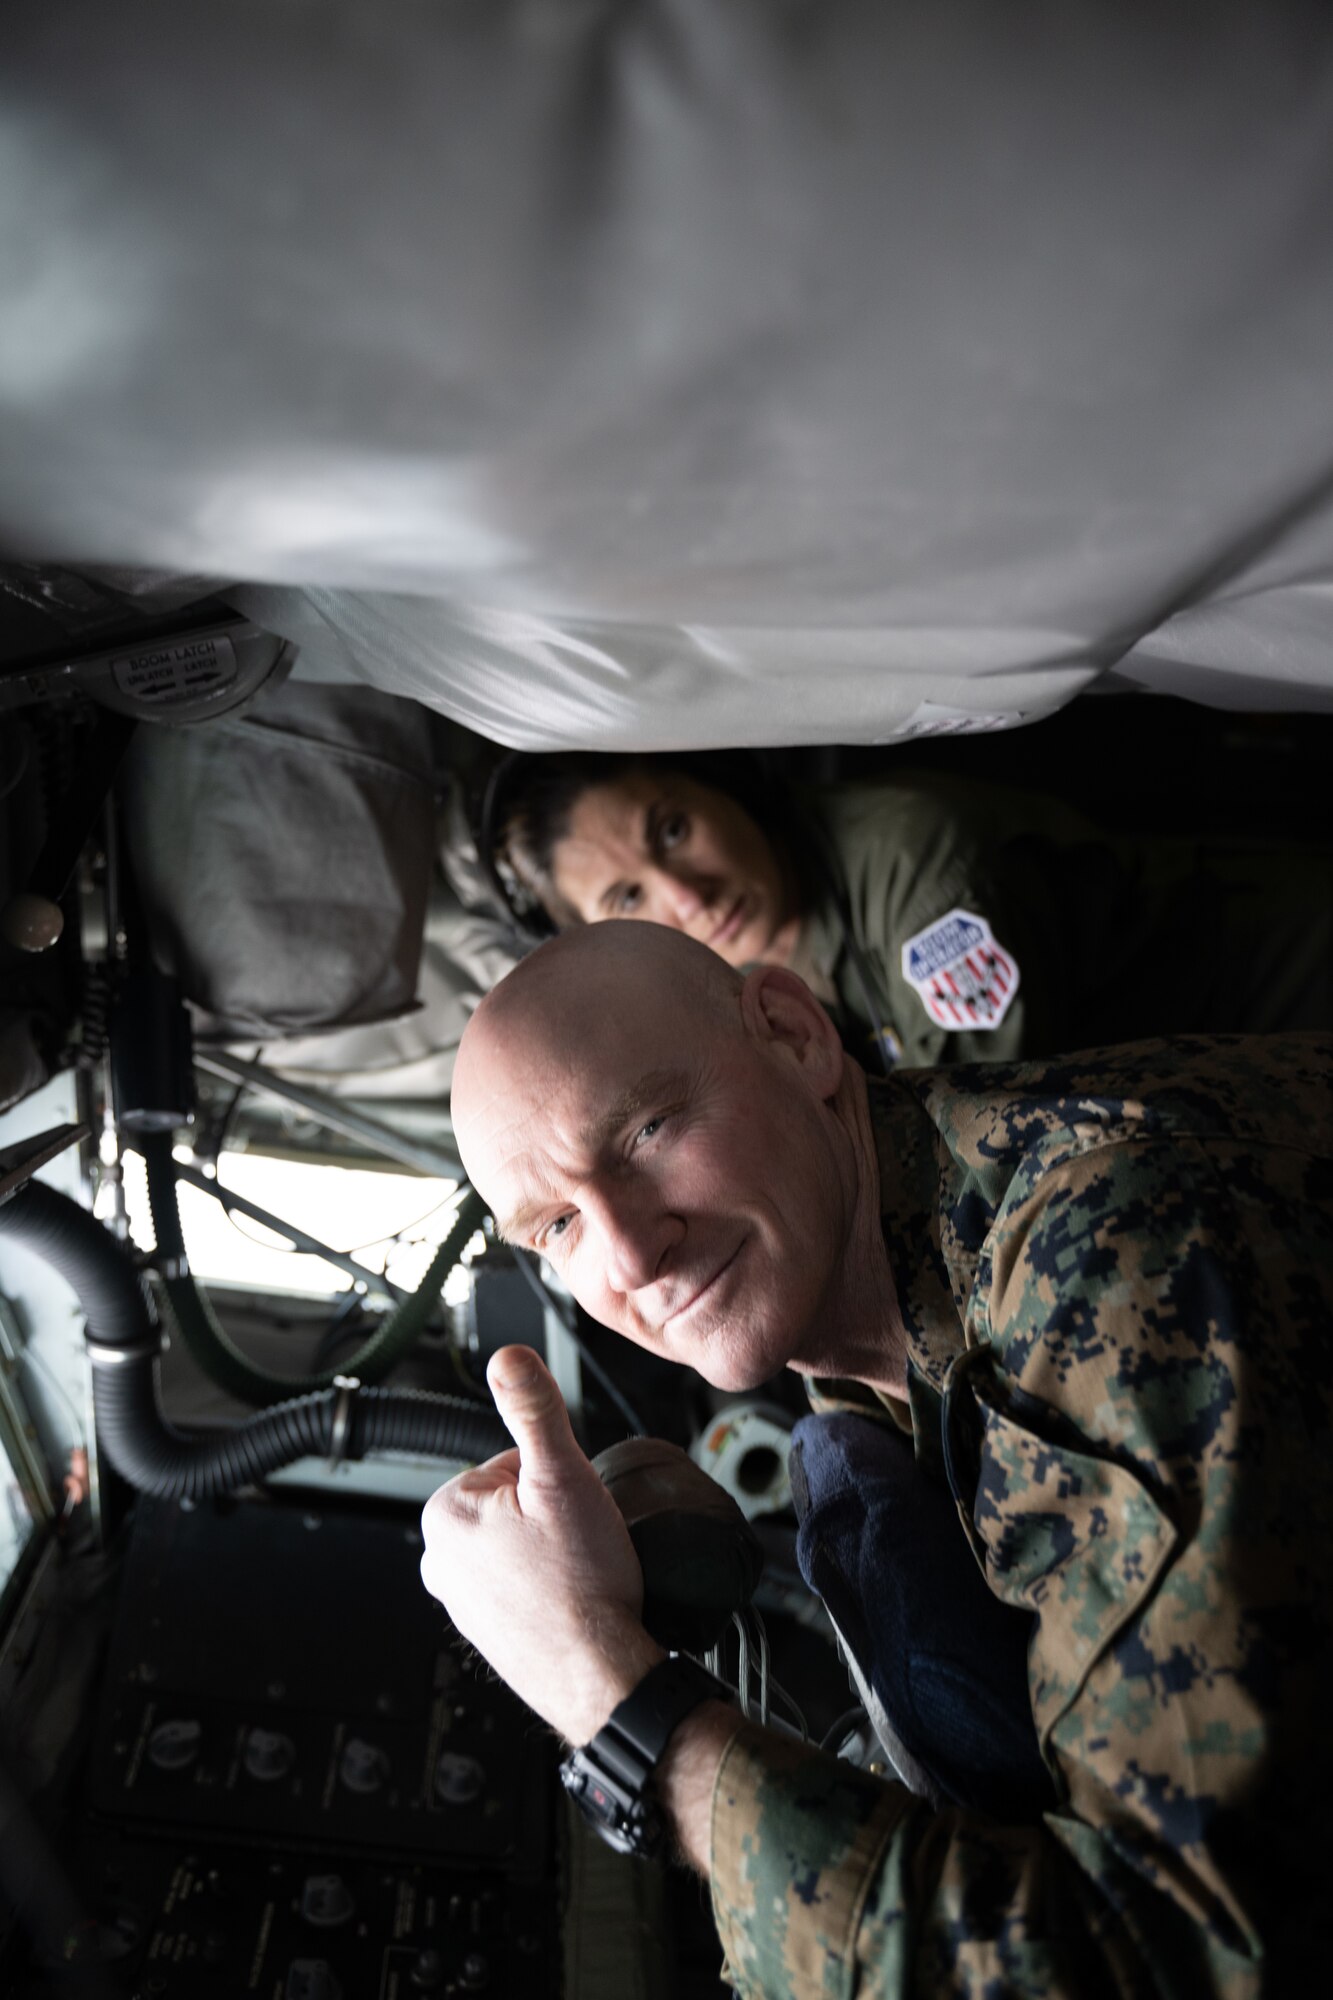 The Senior Enlisted Advisor to the Chairman of the Joint Chiefs of Staff, U.S. Marine Corps Sgt. Maj. Troy Black, visited the 459th Air Refueling Wing to participate in an air refueling orientation flight on the Air Force Reserve unit’s KC-135 Stratotanker aircraft on March 19, 2024. The SEAC also spoke to Joint Base Andrews service members later in the day during an All Hands call at the 459th ARW auditorium.